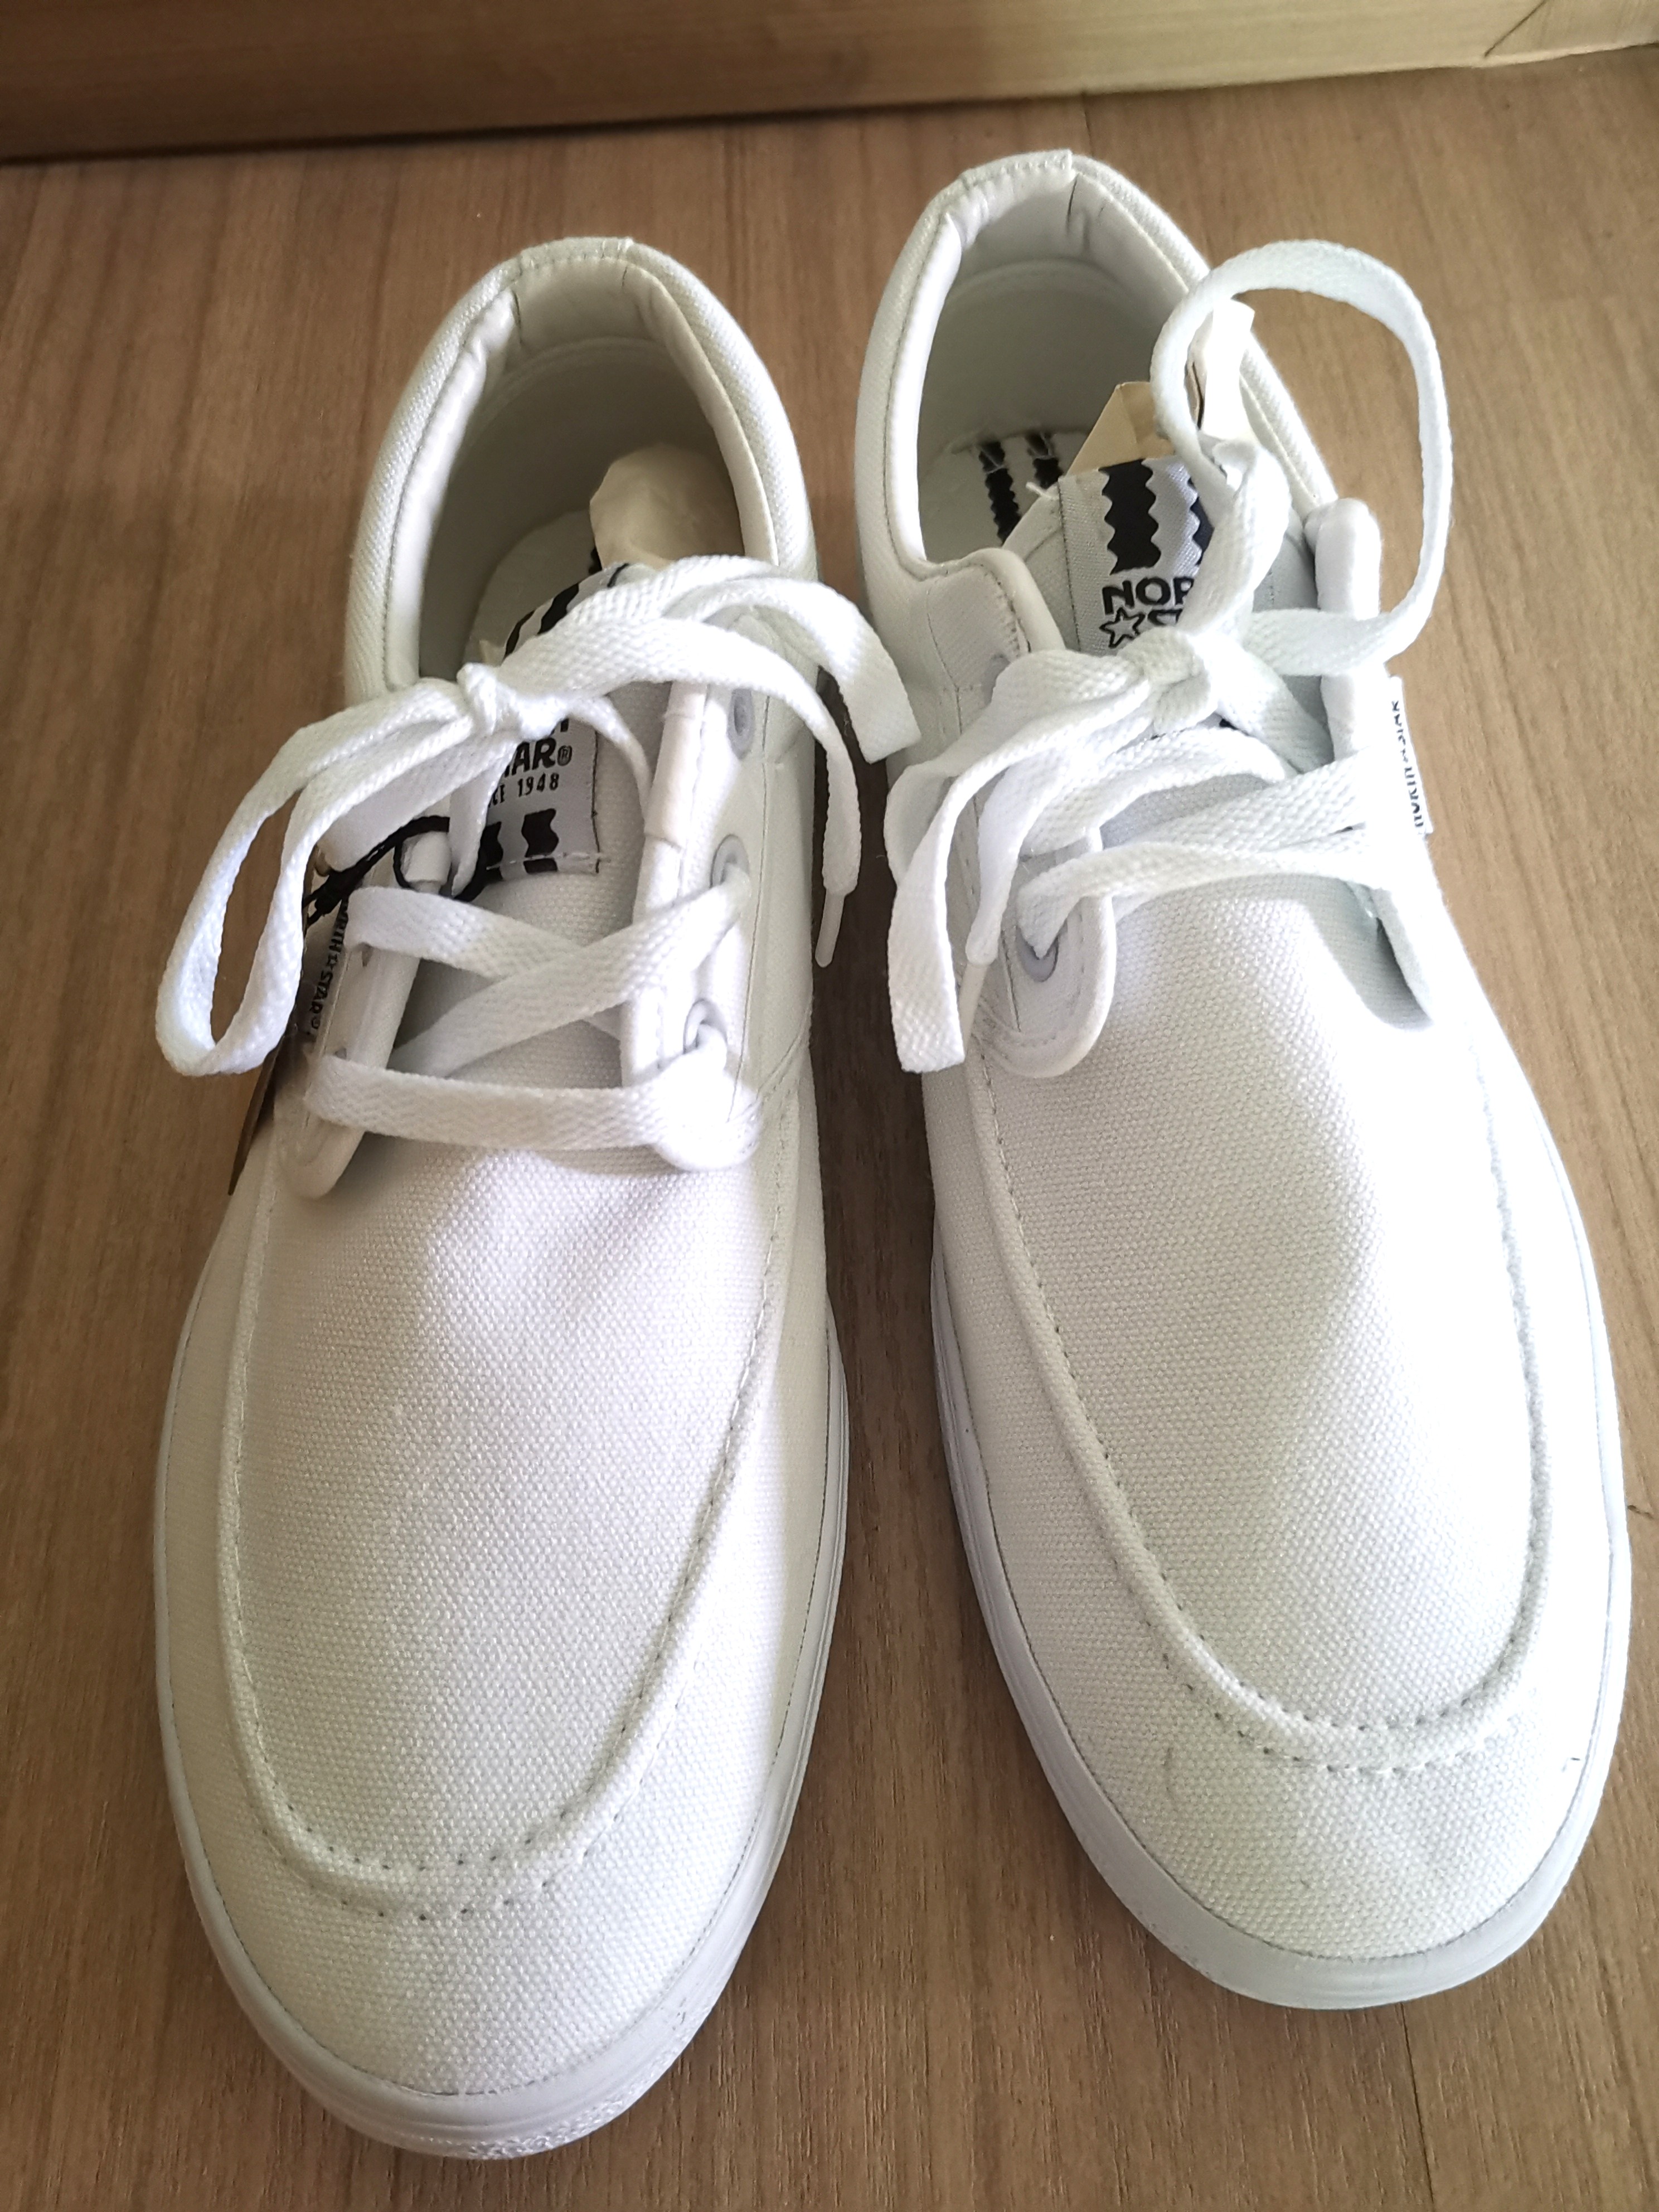 New North Star White Shoes, Men's Fashion, Footwear, Dress shoes on ...